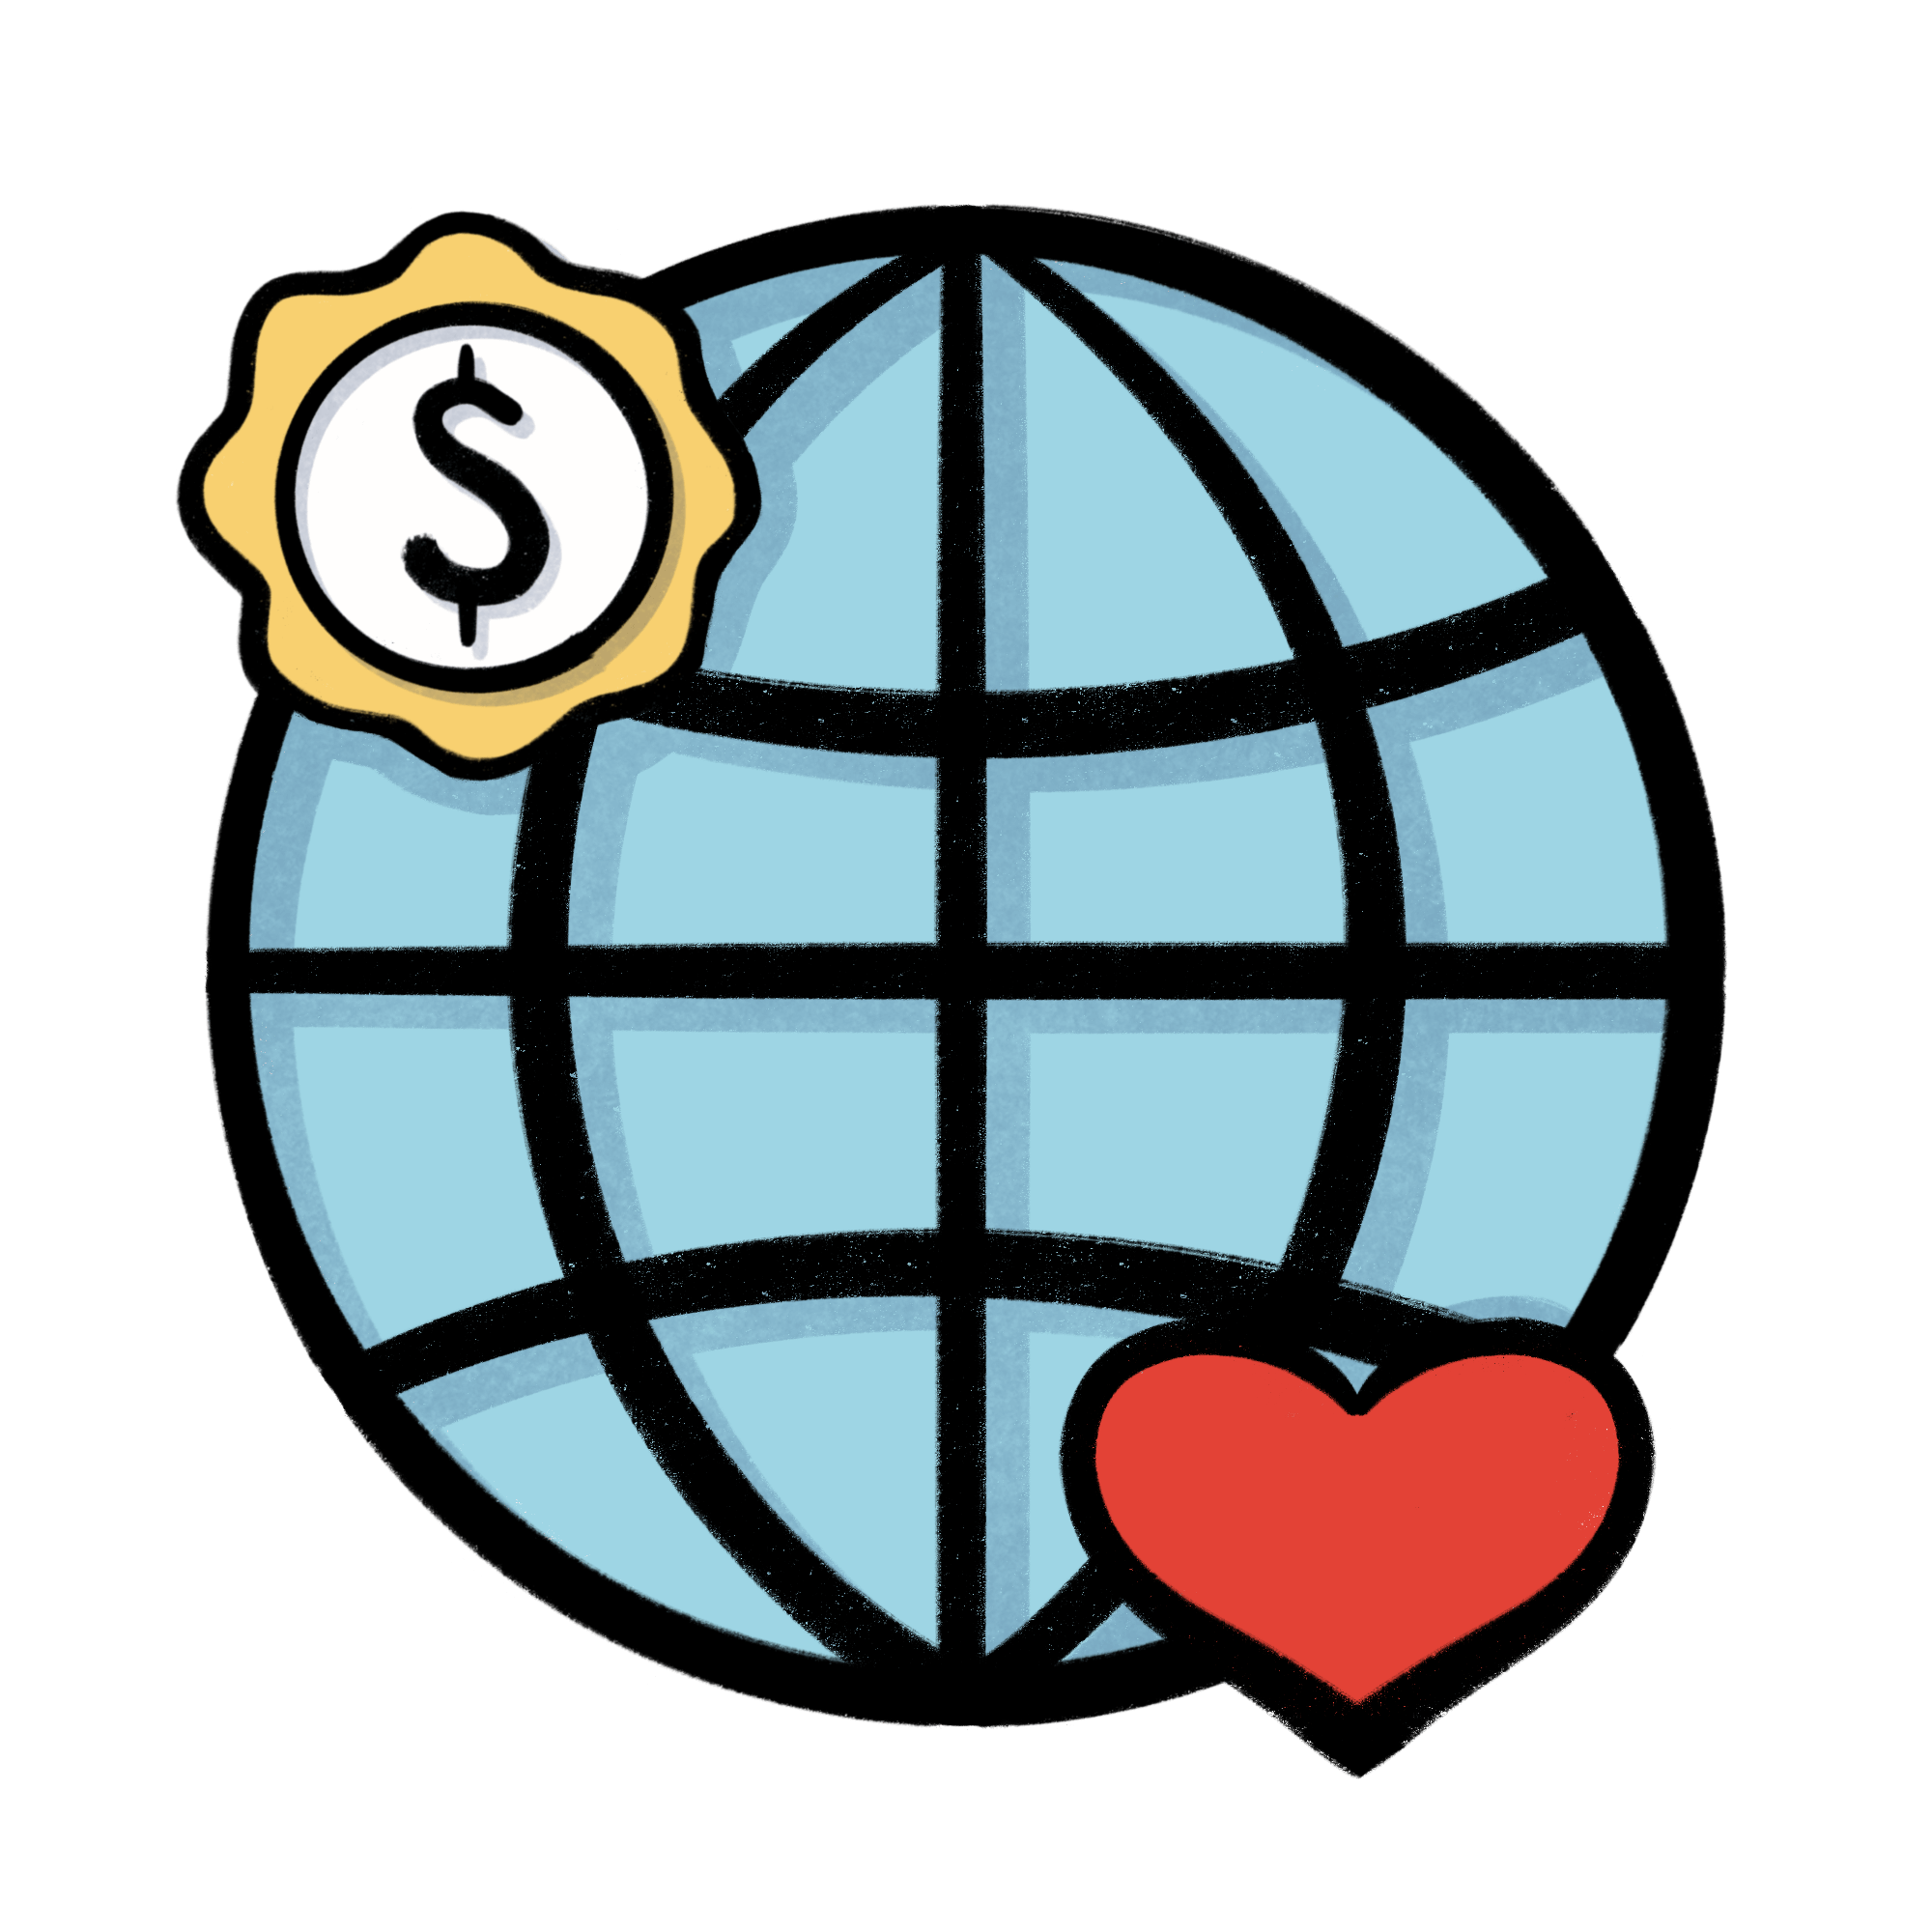 An image of an earth globe with a heart and dollar sign